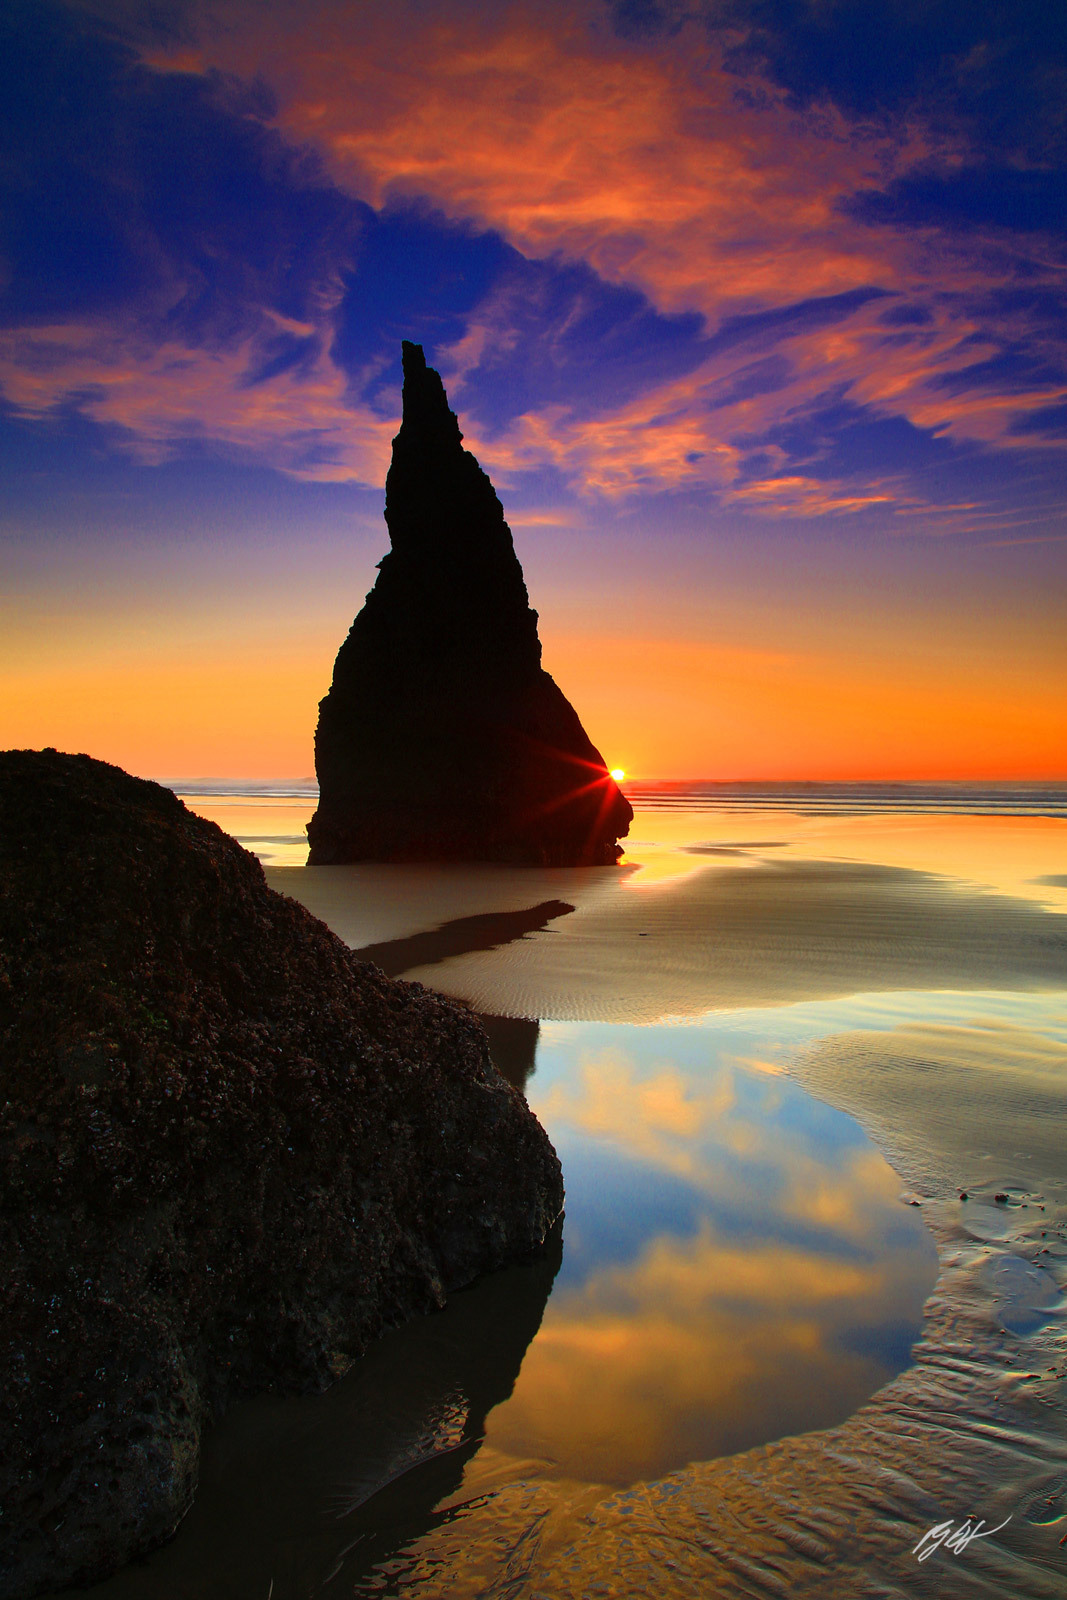 Sunset and Sunstar with the Wizards Hat from Face Rock Beach in Bandon on the Southern Oregon Coast